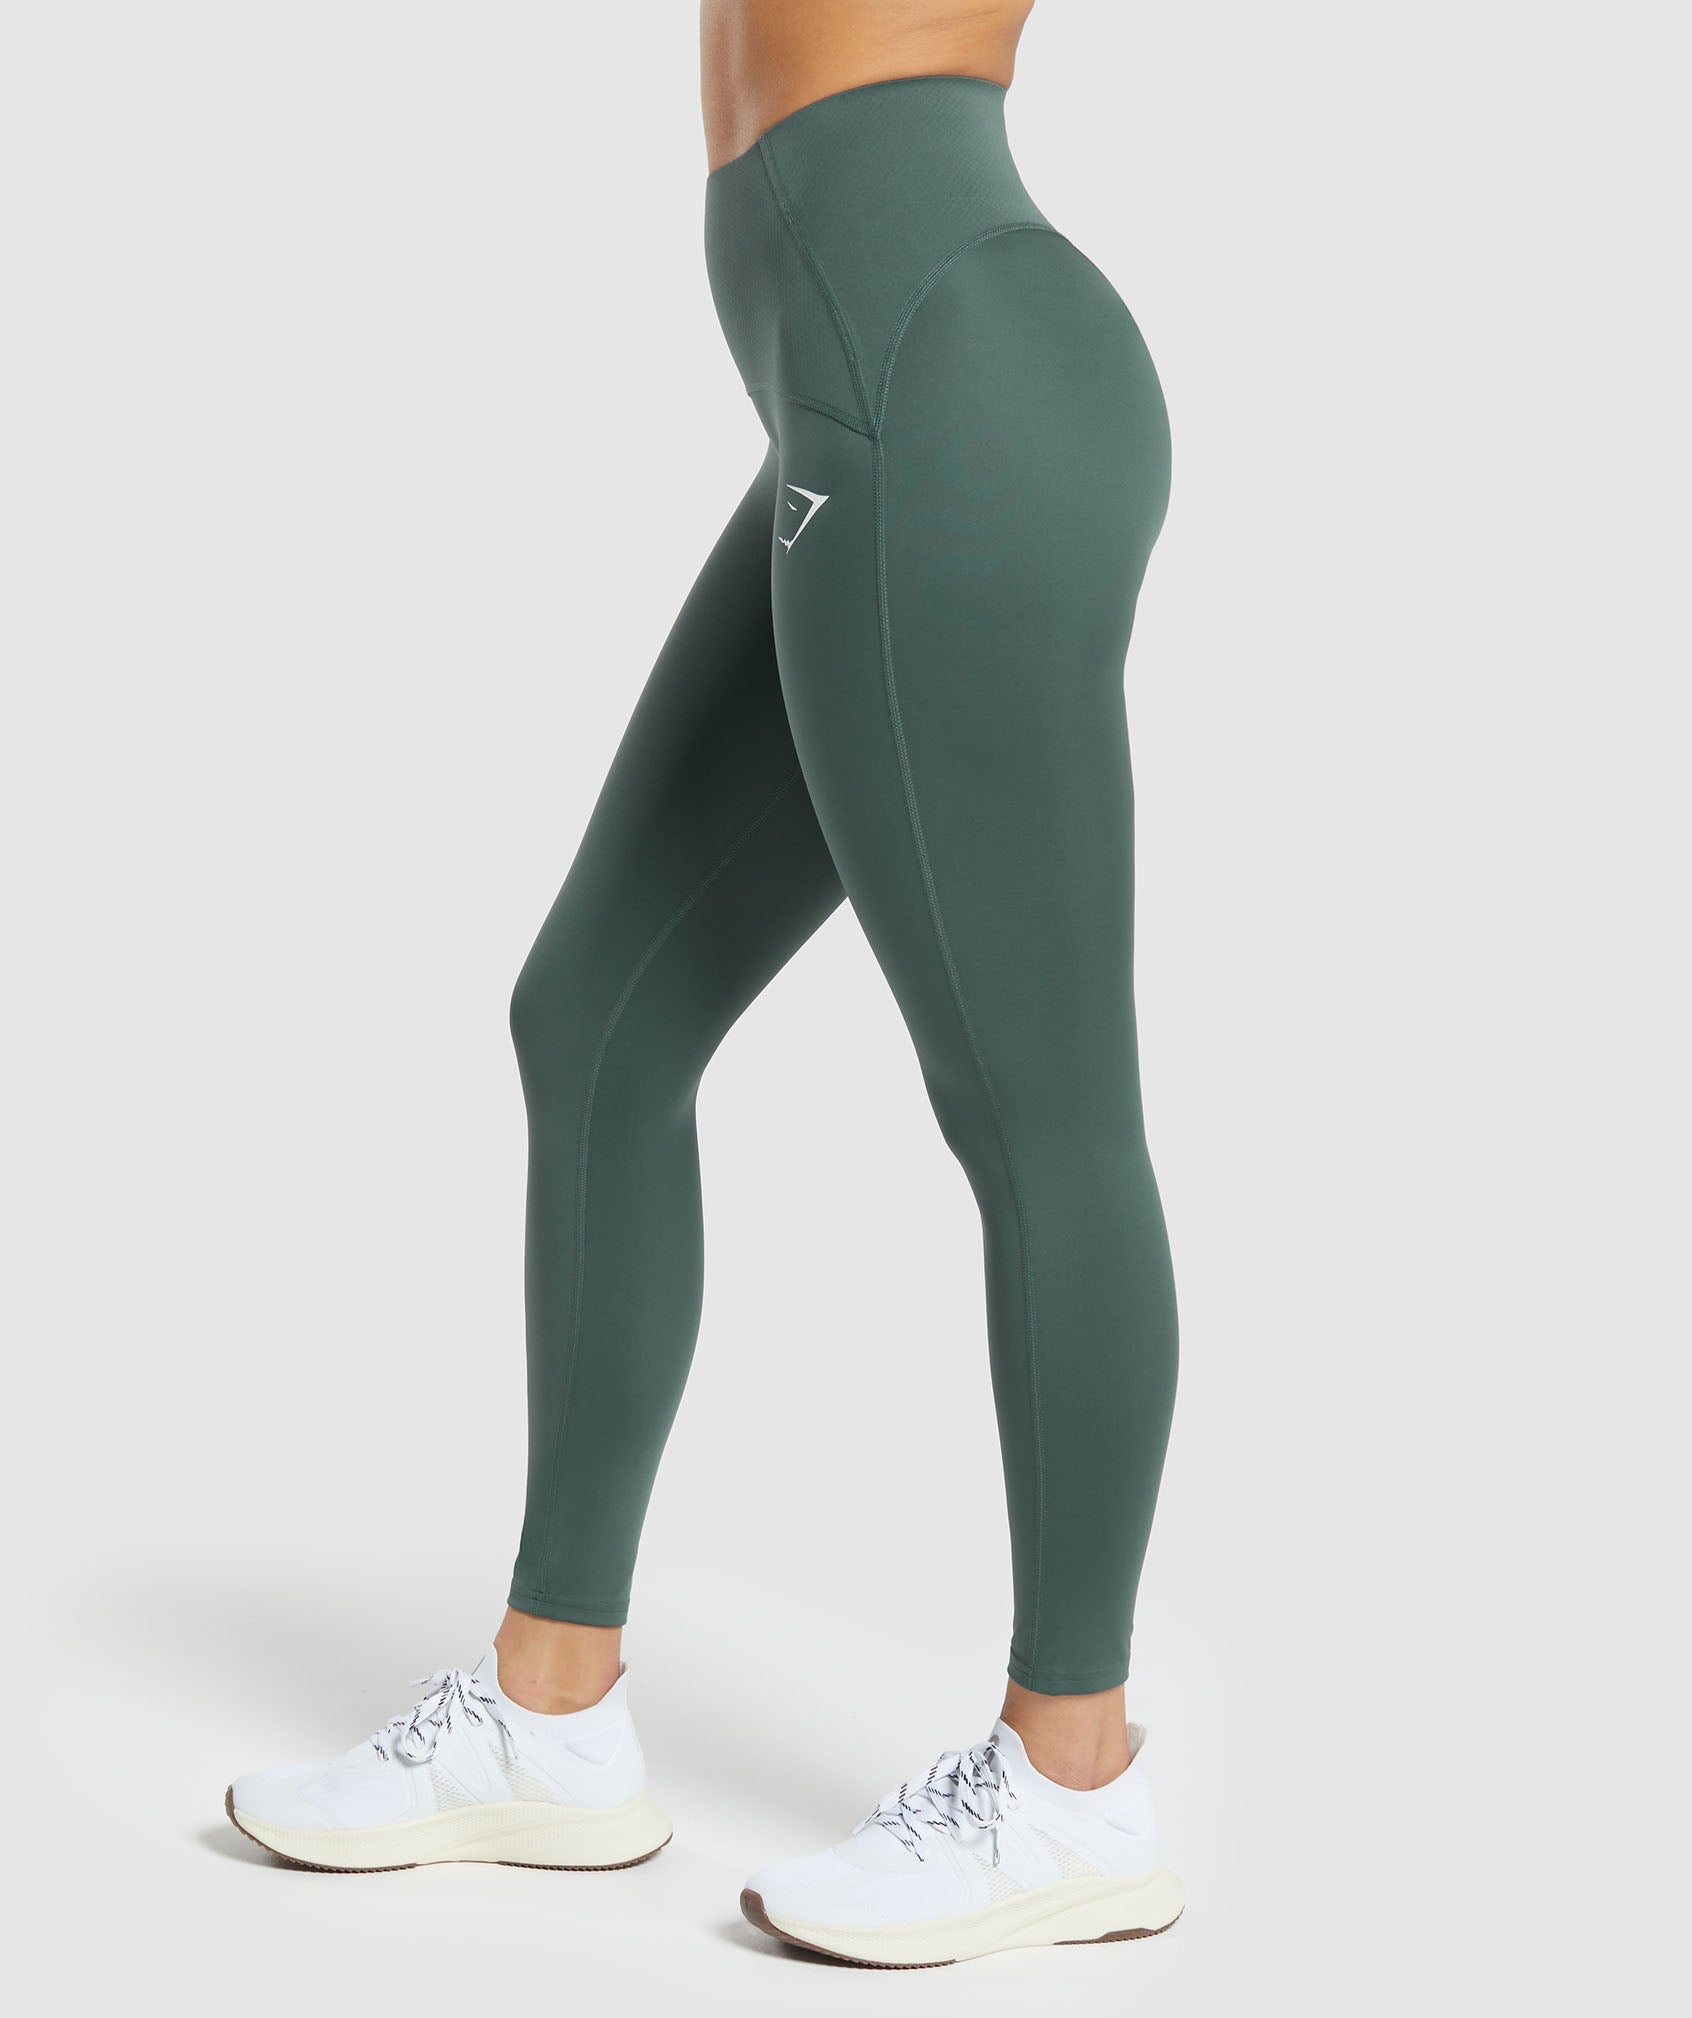 Waist Support Leggings in Slate Teal - view 3